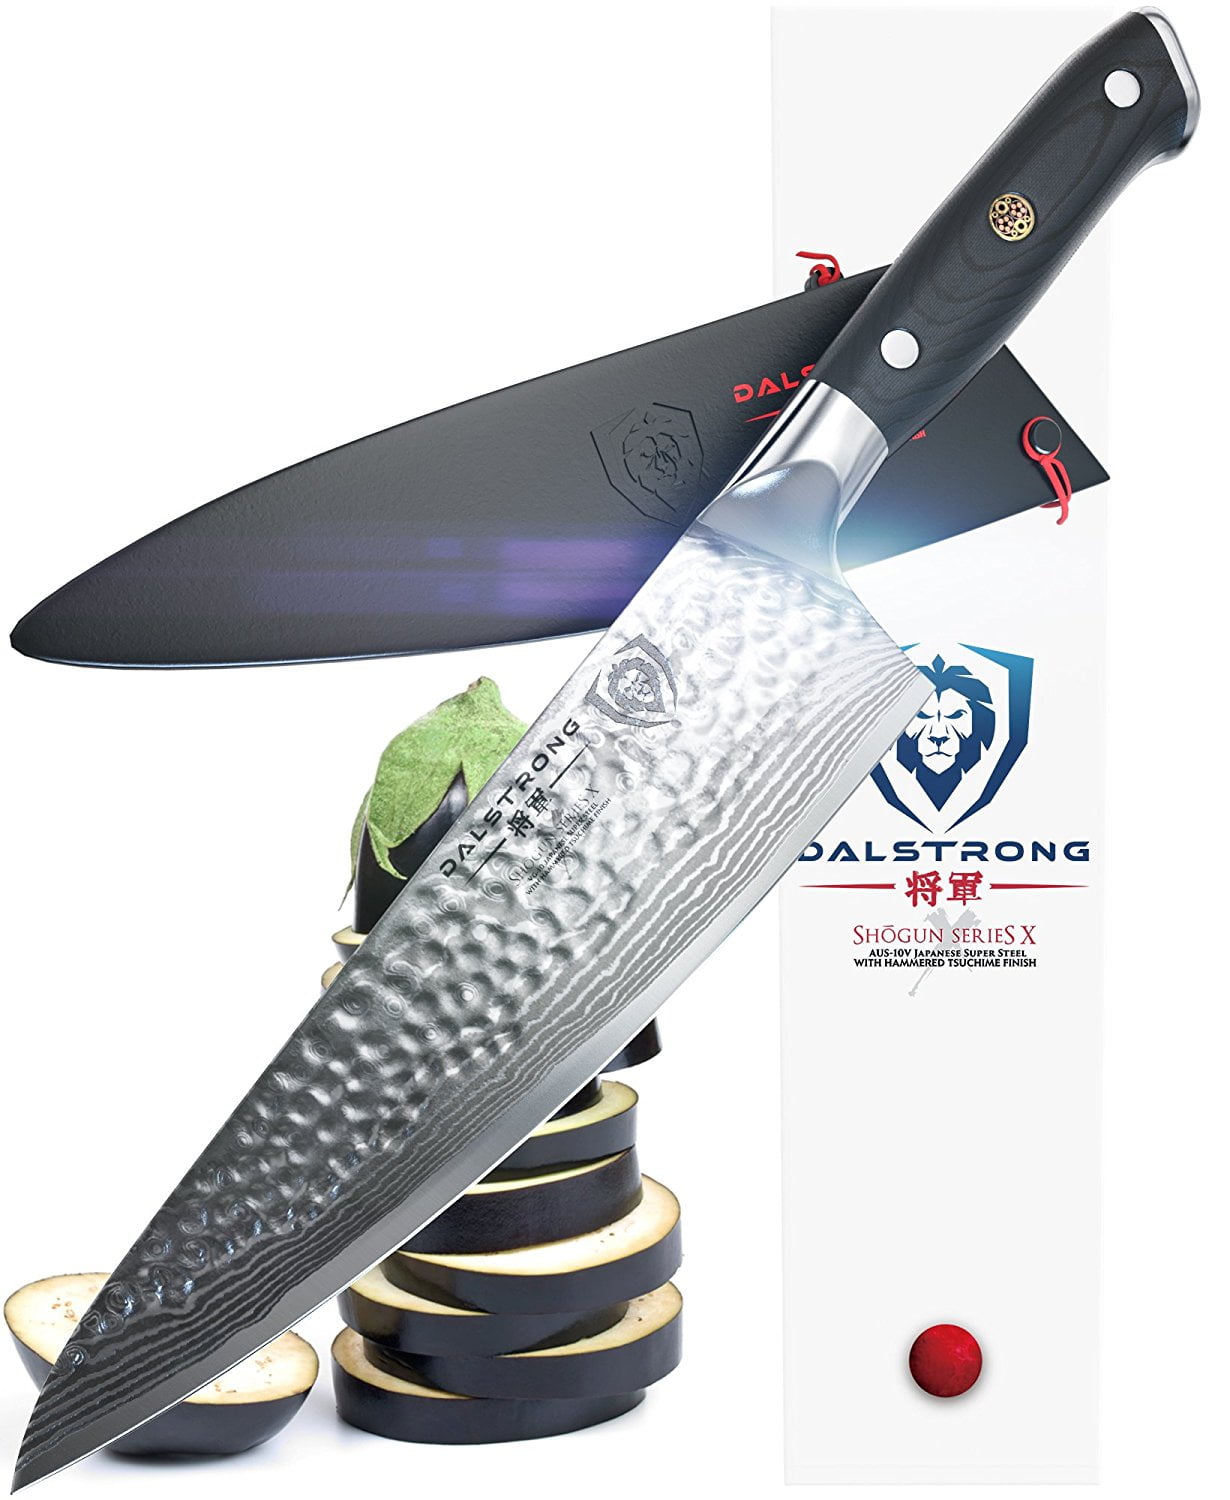 Dalstrong - 8 Chef's KnifeThe Crixus - Shogun Series - Chef & Cleaver Hybrid - Japanese AUS-10V Super Steel - Meat Knife - w/Sheath